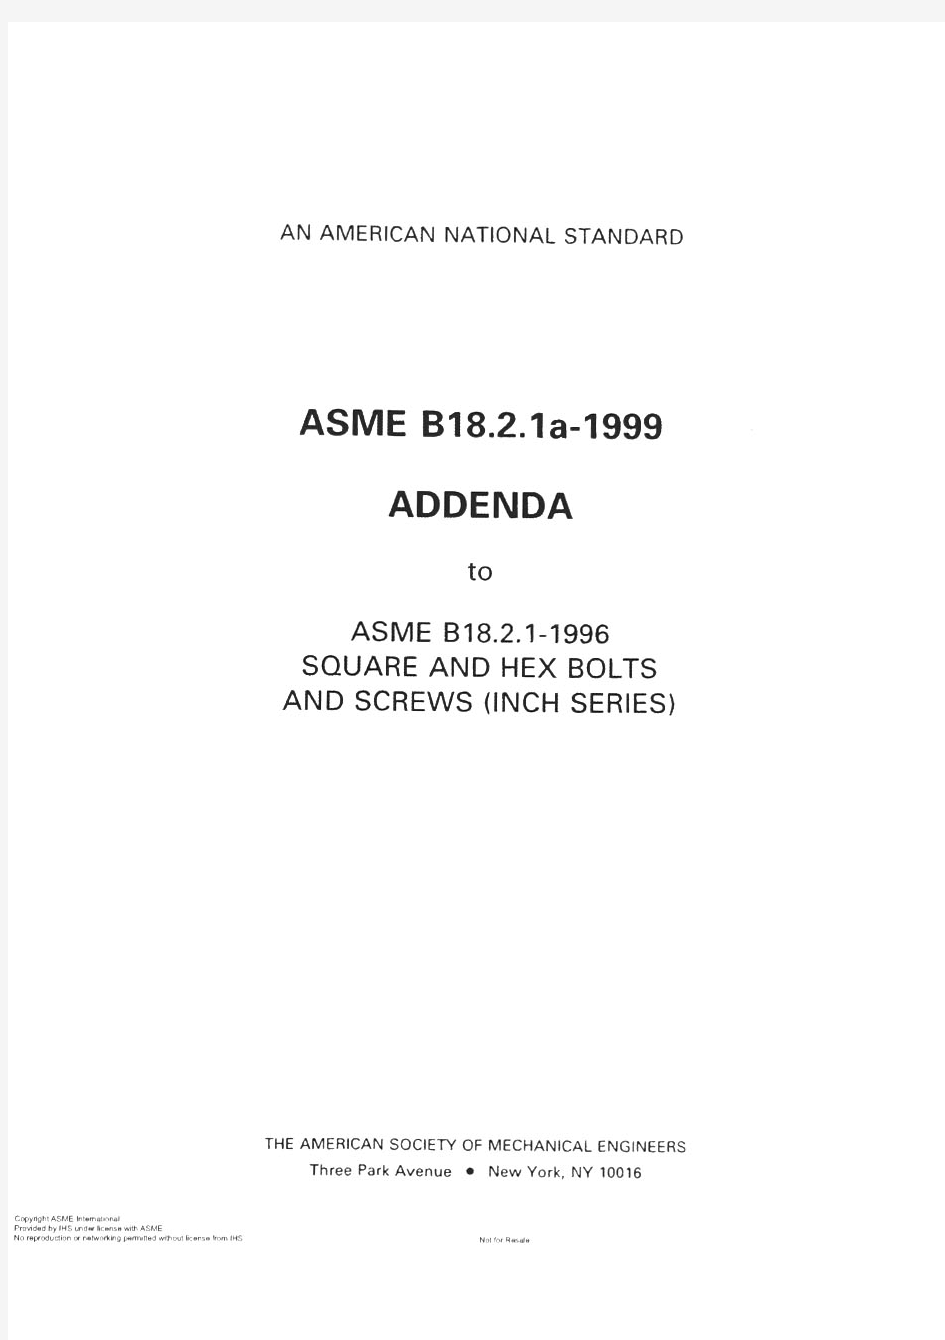 ASME B18.2.1a-1999 Addenda to ASME B18.2.1-1996 square and hex bolts and screws (inch series)